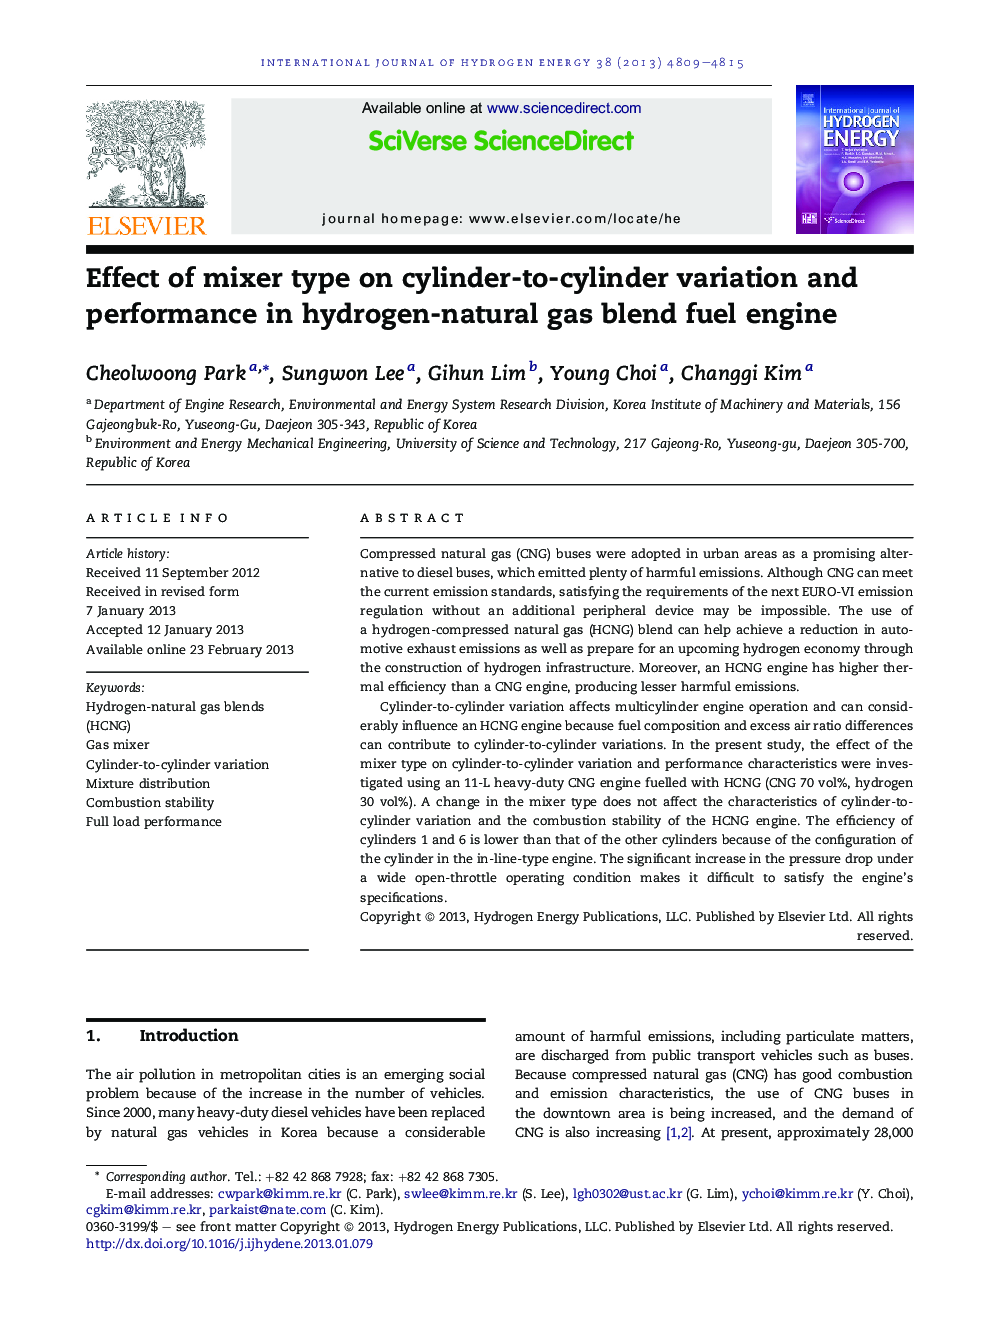 Effect of mixer type on cylinder-to-cylinder variation and performance in hydrogen-natural gas blend fuel engine